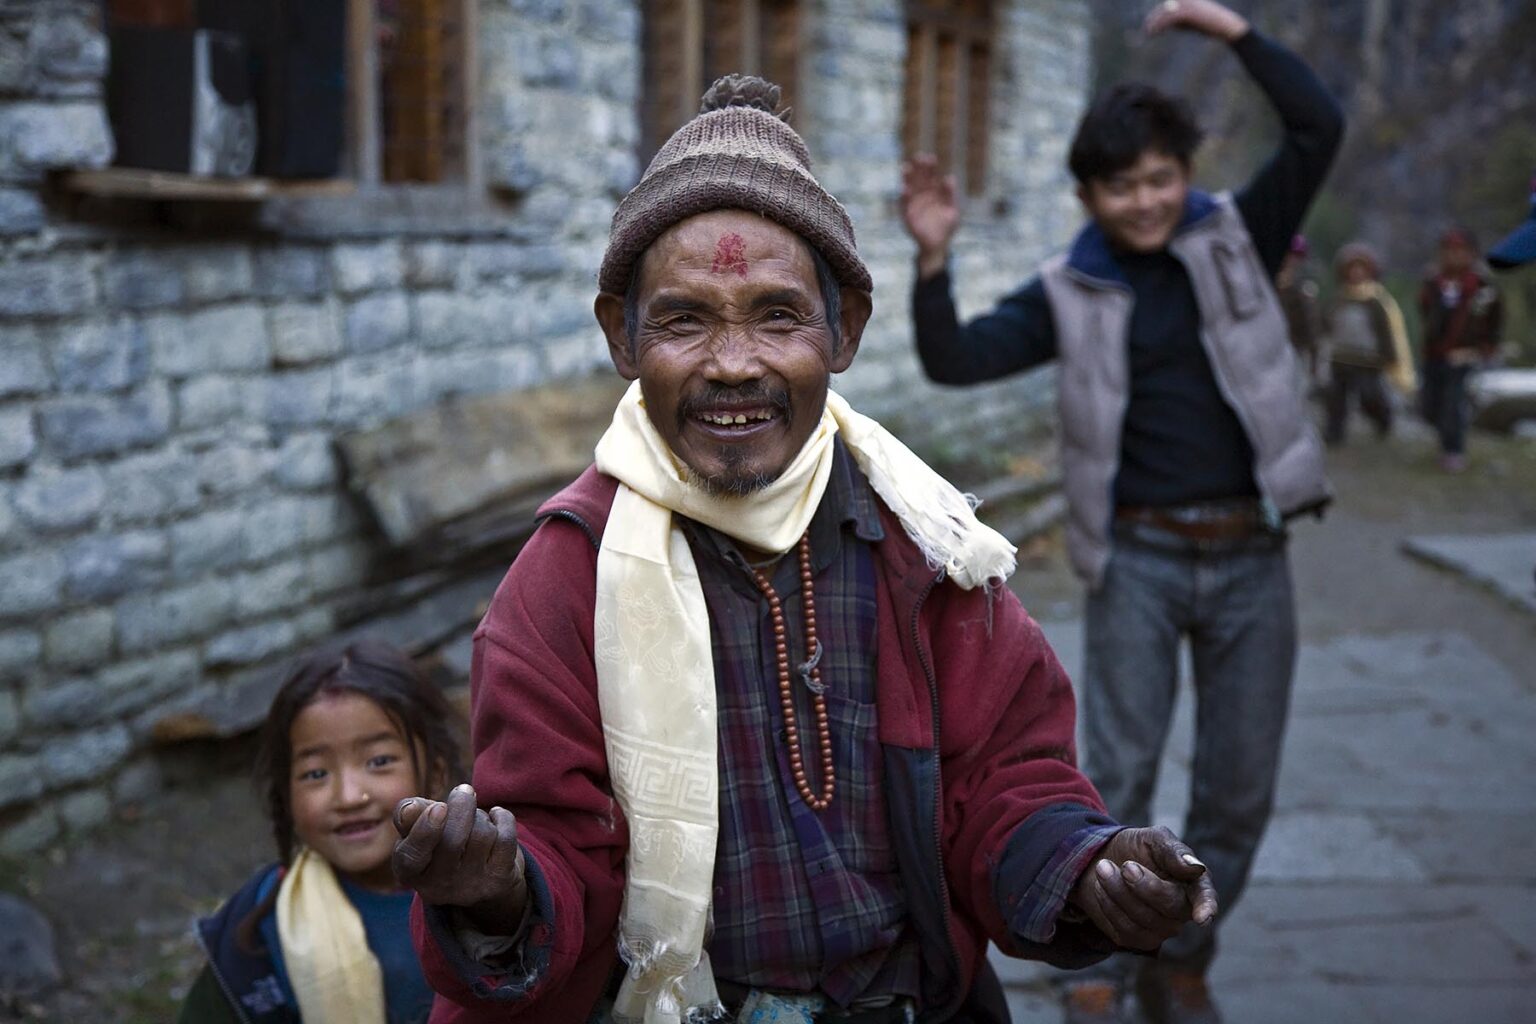 BUDDHIST villagers dance at a WEDDING CELEBRATION in the village of KOTO on the ANNAPURNA CIRCUIT - NEPAL HIMALAYA